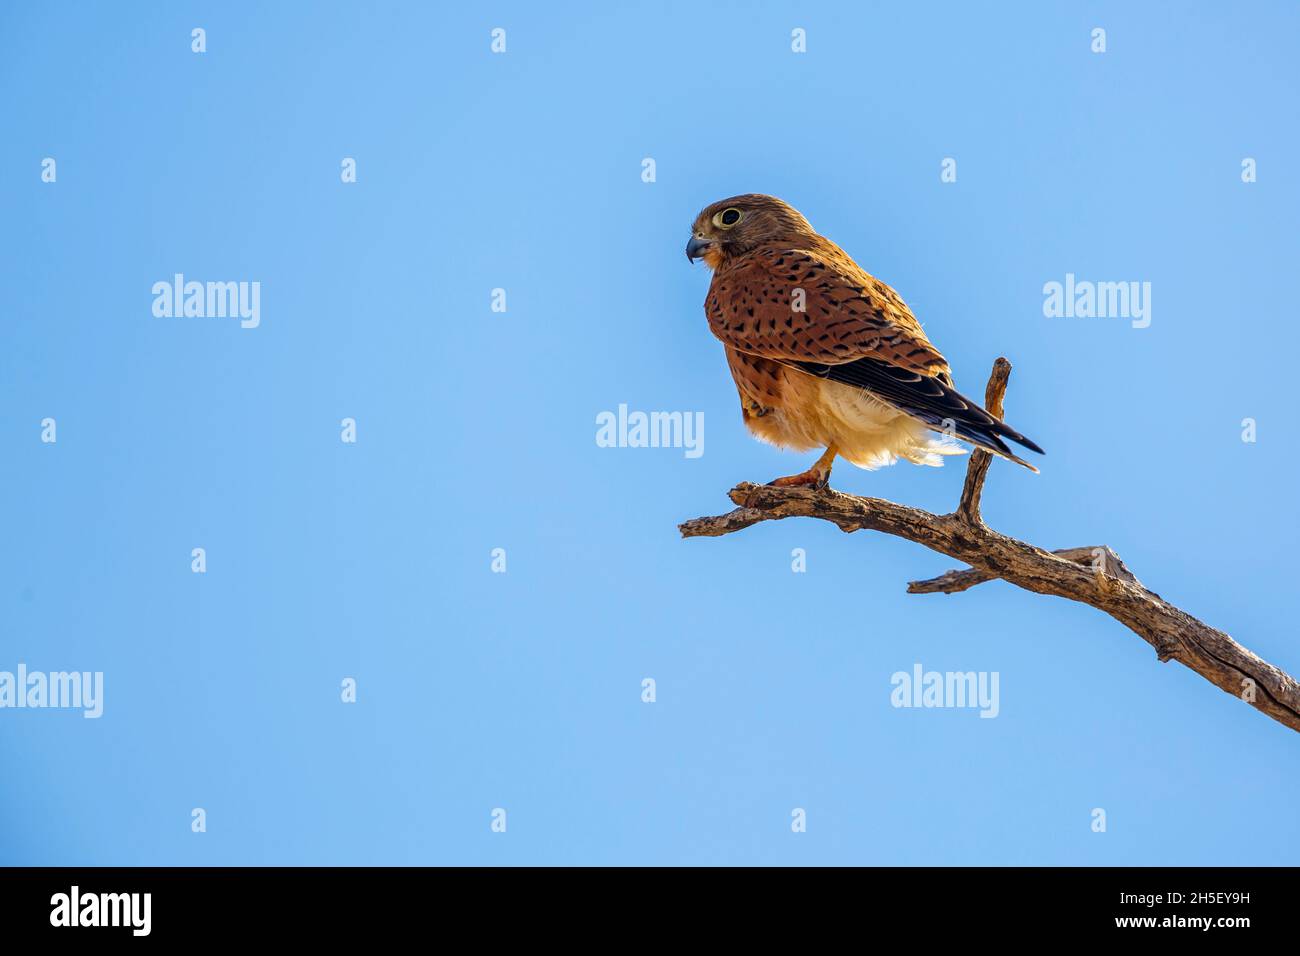 South African Kestrel perched on a branch isolated in blue sky in ...